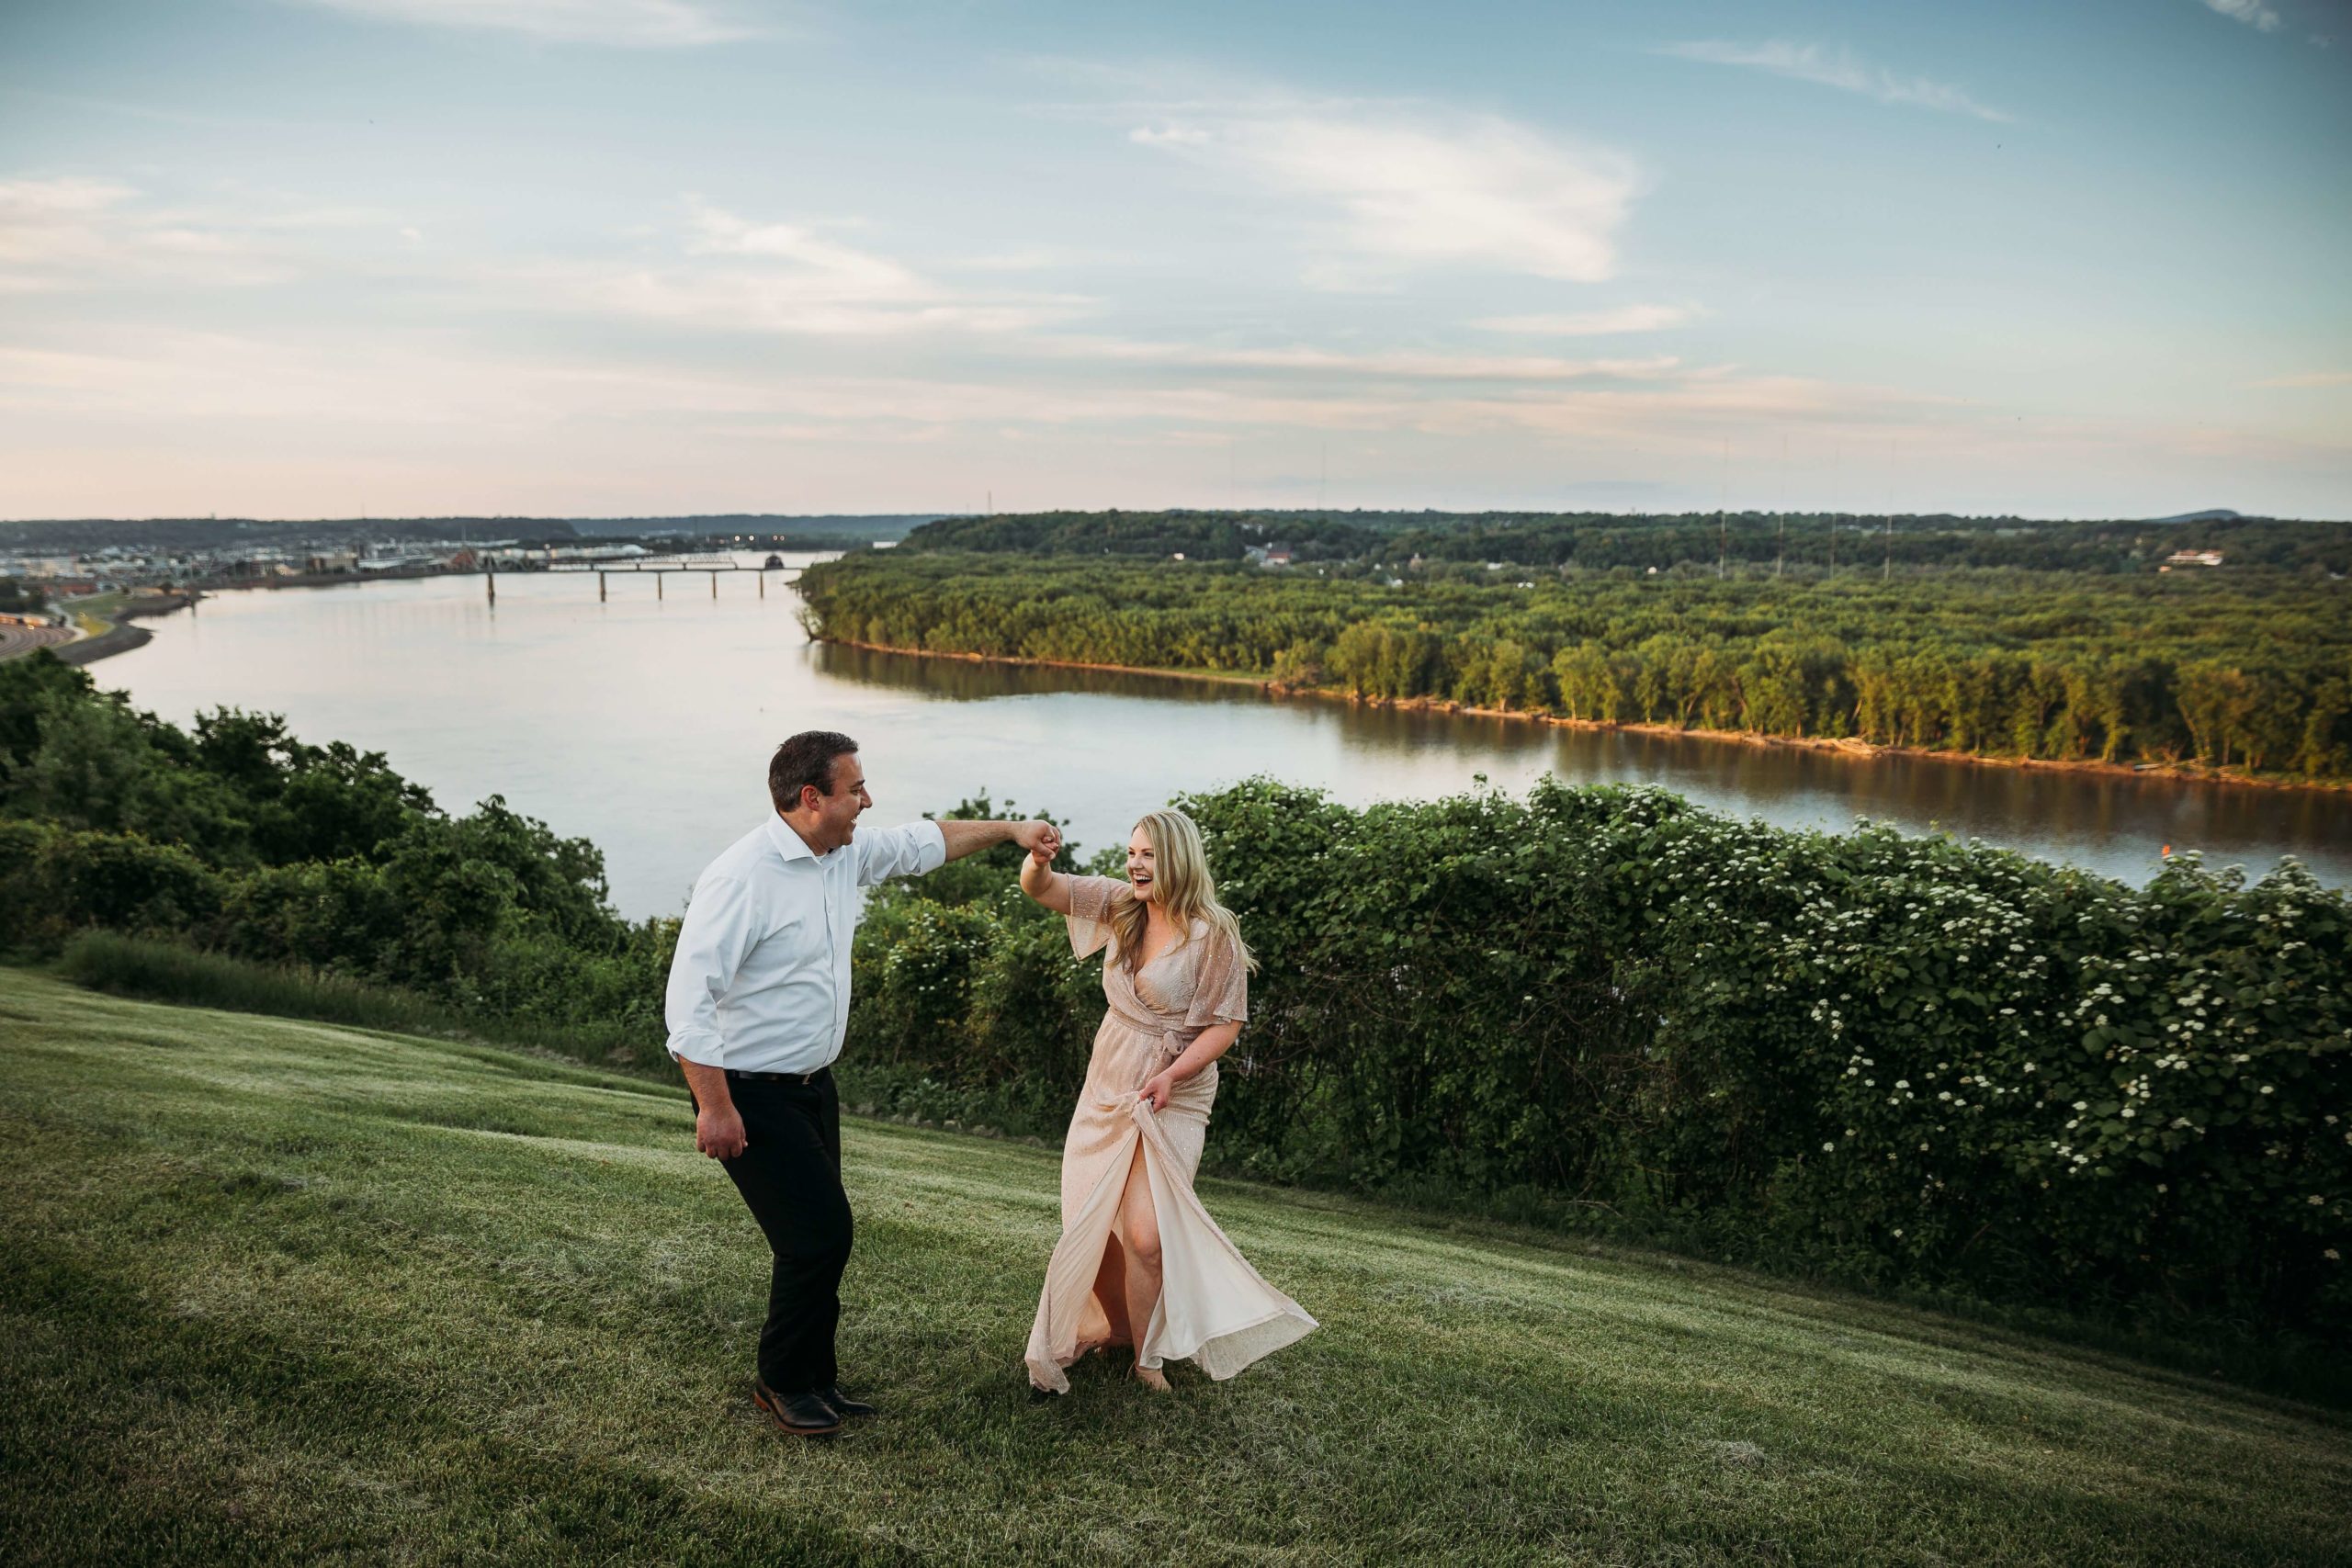 couple dancing together with a view of the mississippi river in the background